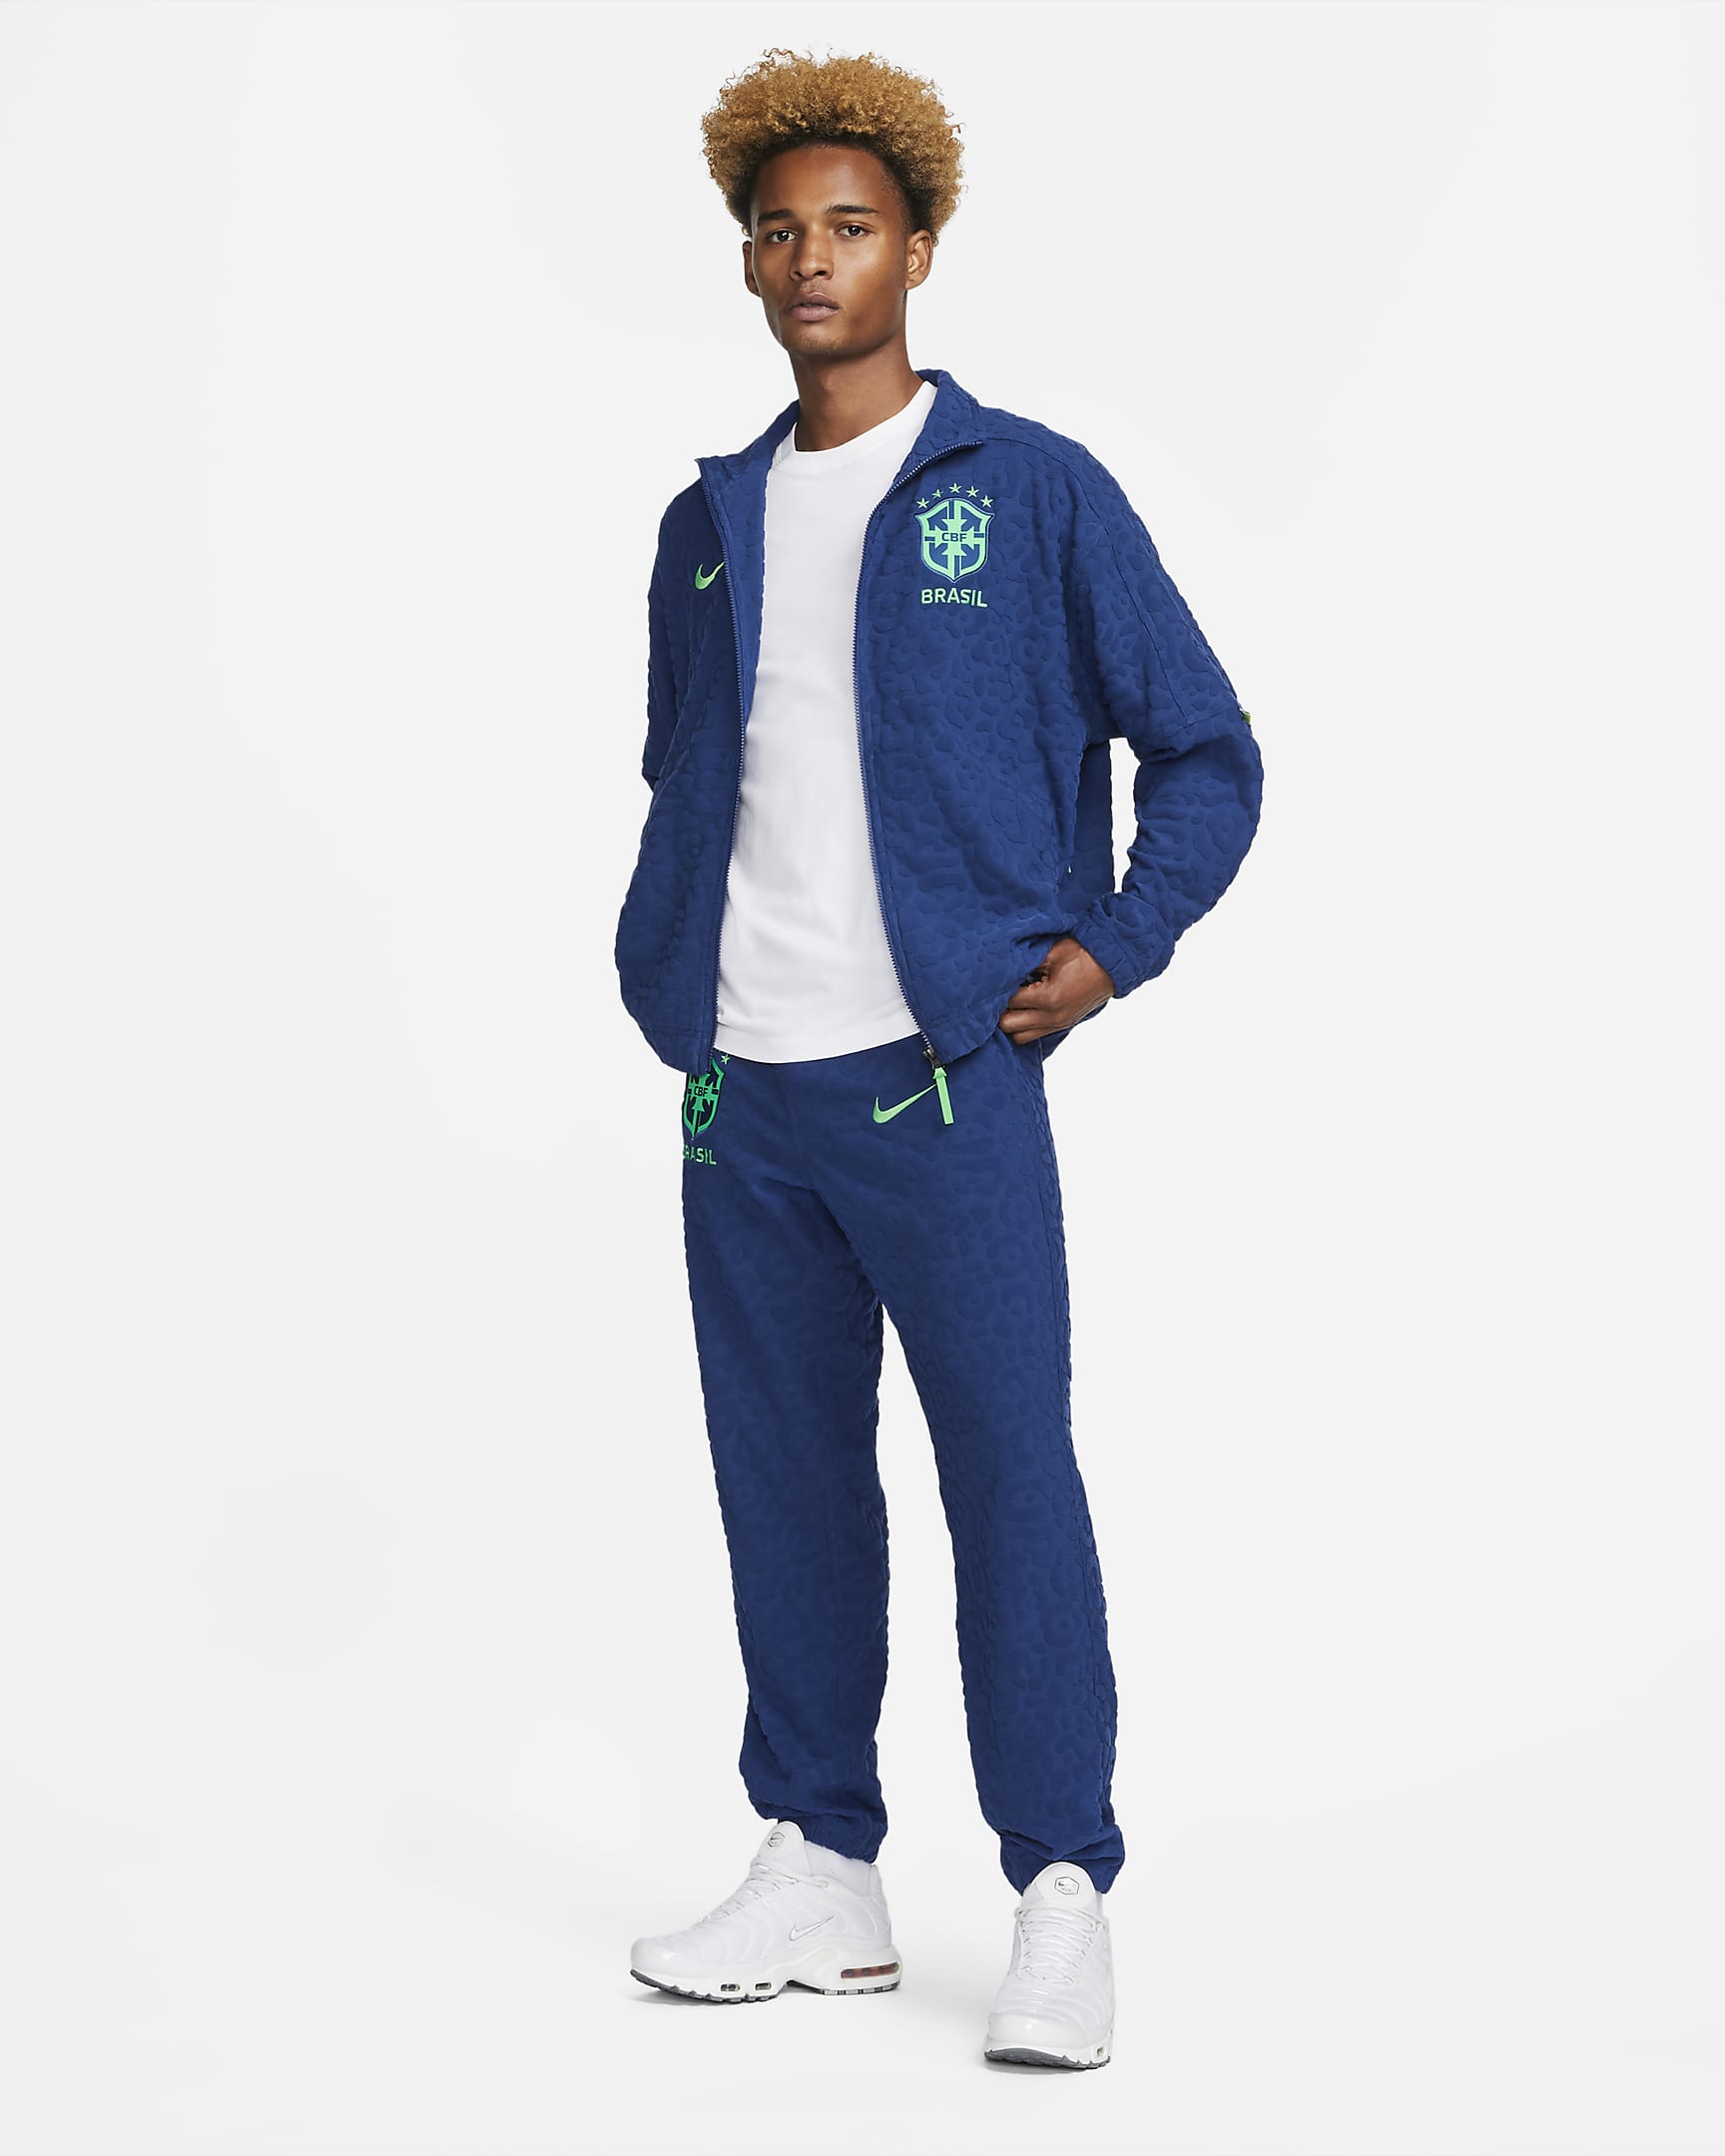 Brazil Men's French Terry Football Tracksuit Jacket. Nike IL